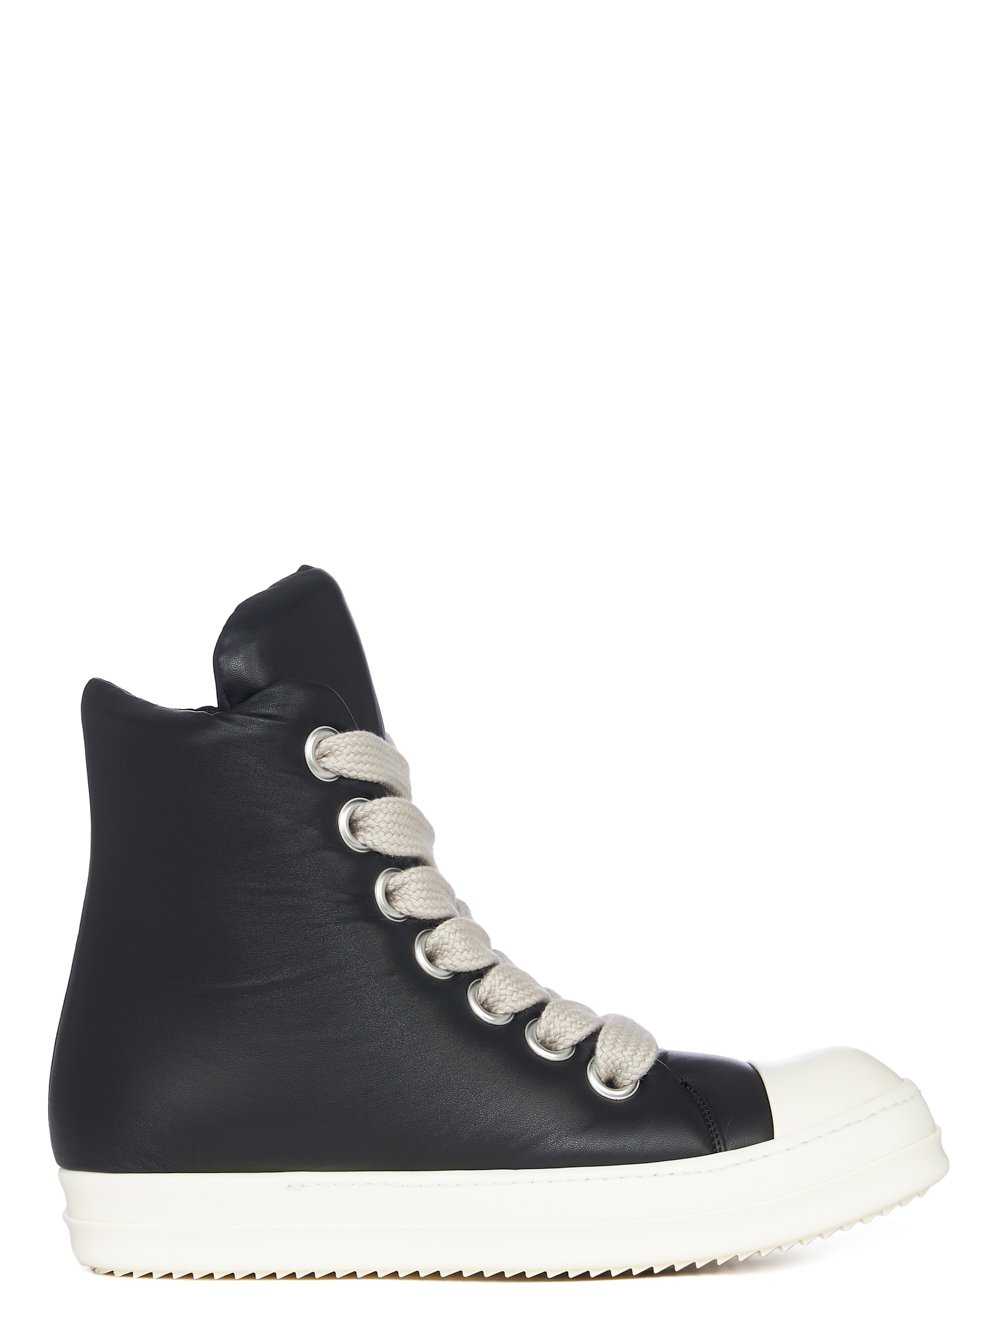 RICK OWENS FW23 LUXOR JUMBO LACE PADDED SNEAKERS IN BLACK AND MILK PEACHED LAMBSKIN